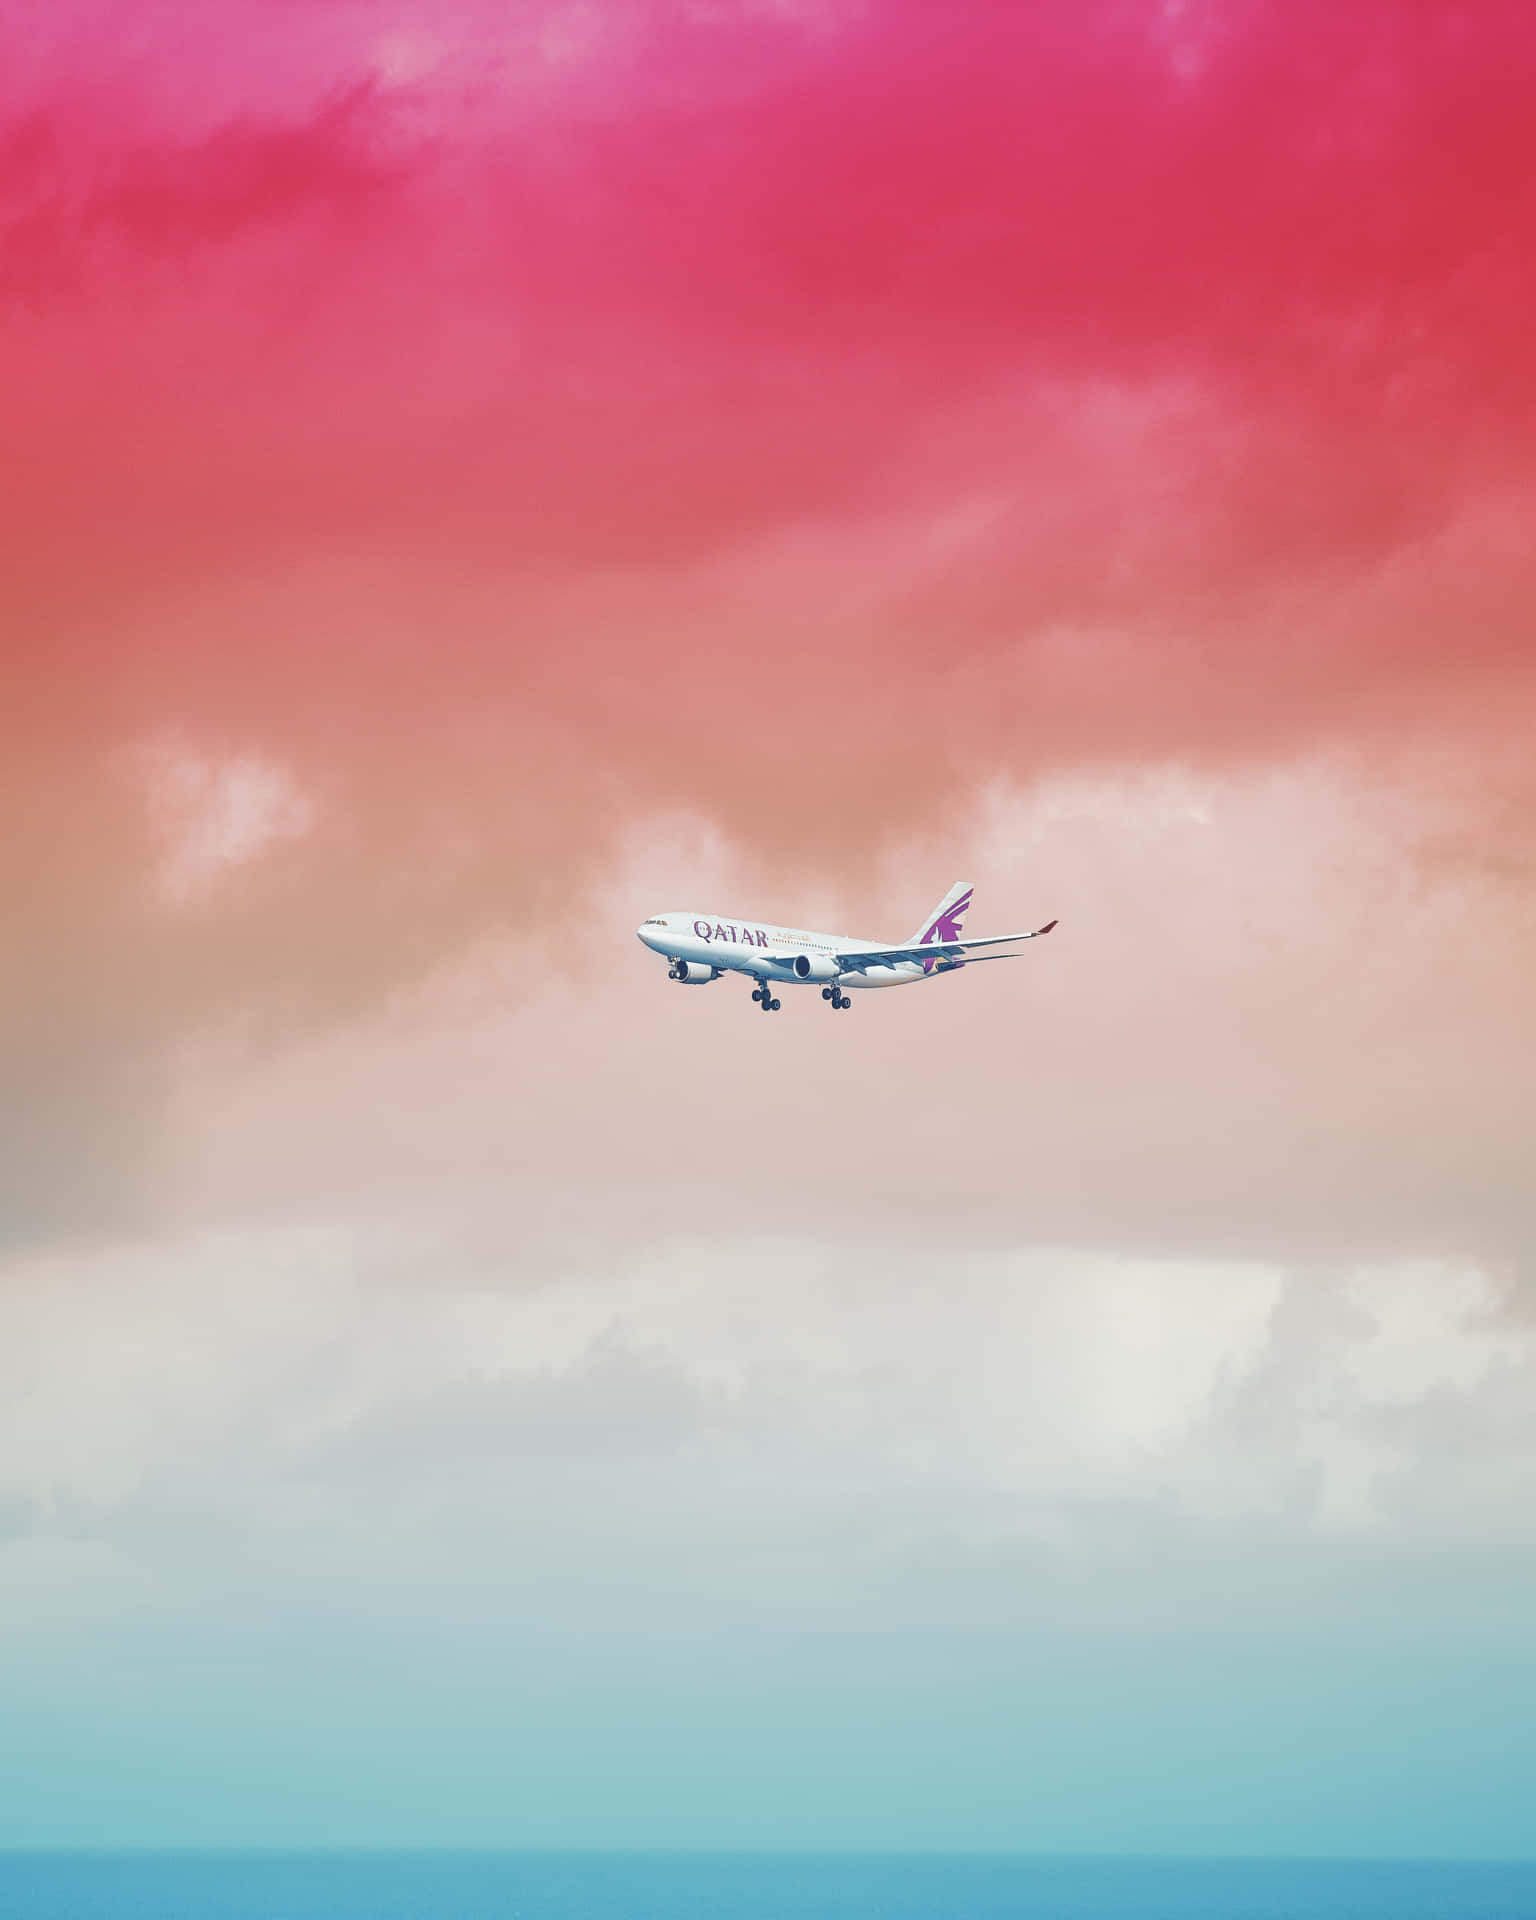 "Fly Higher and Farther in the Stylish Pink Plane" Wallpaper